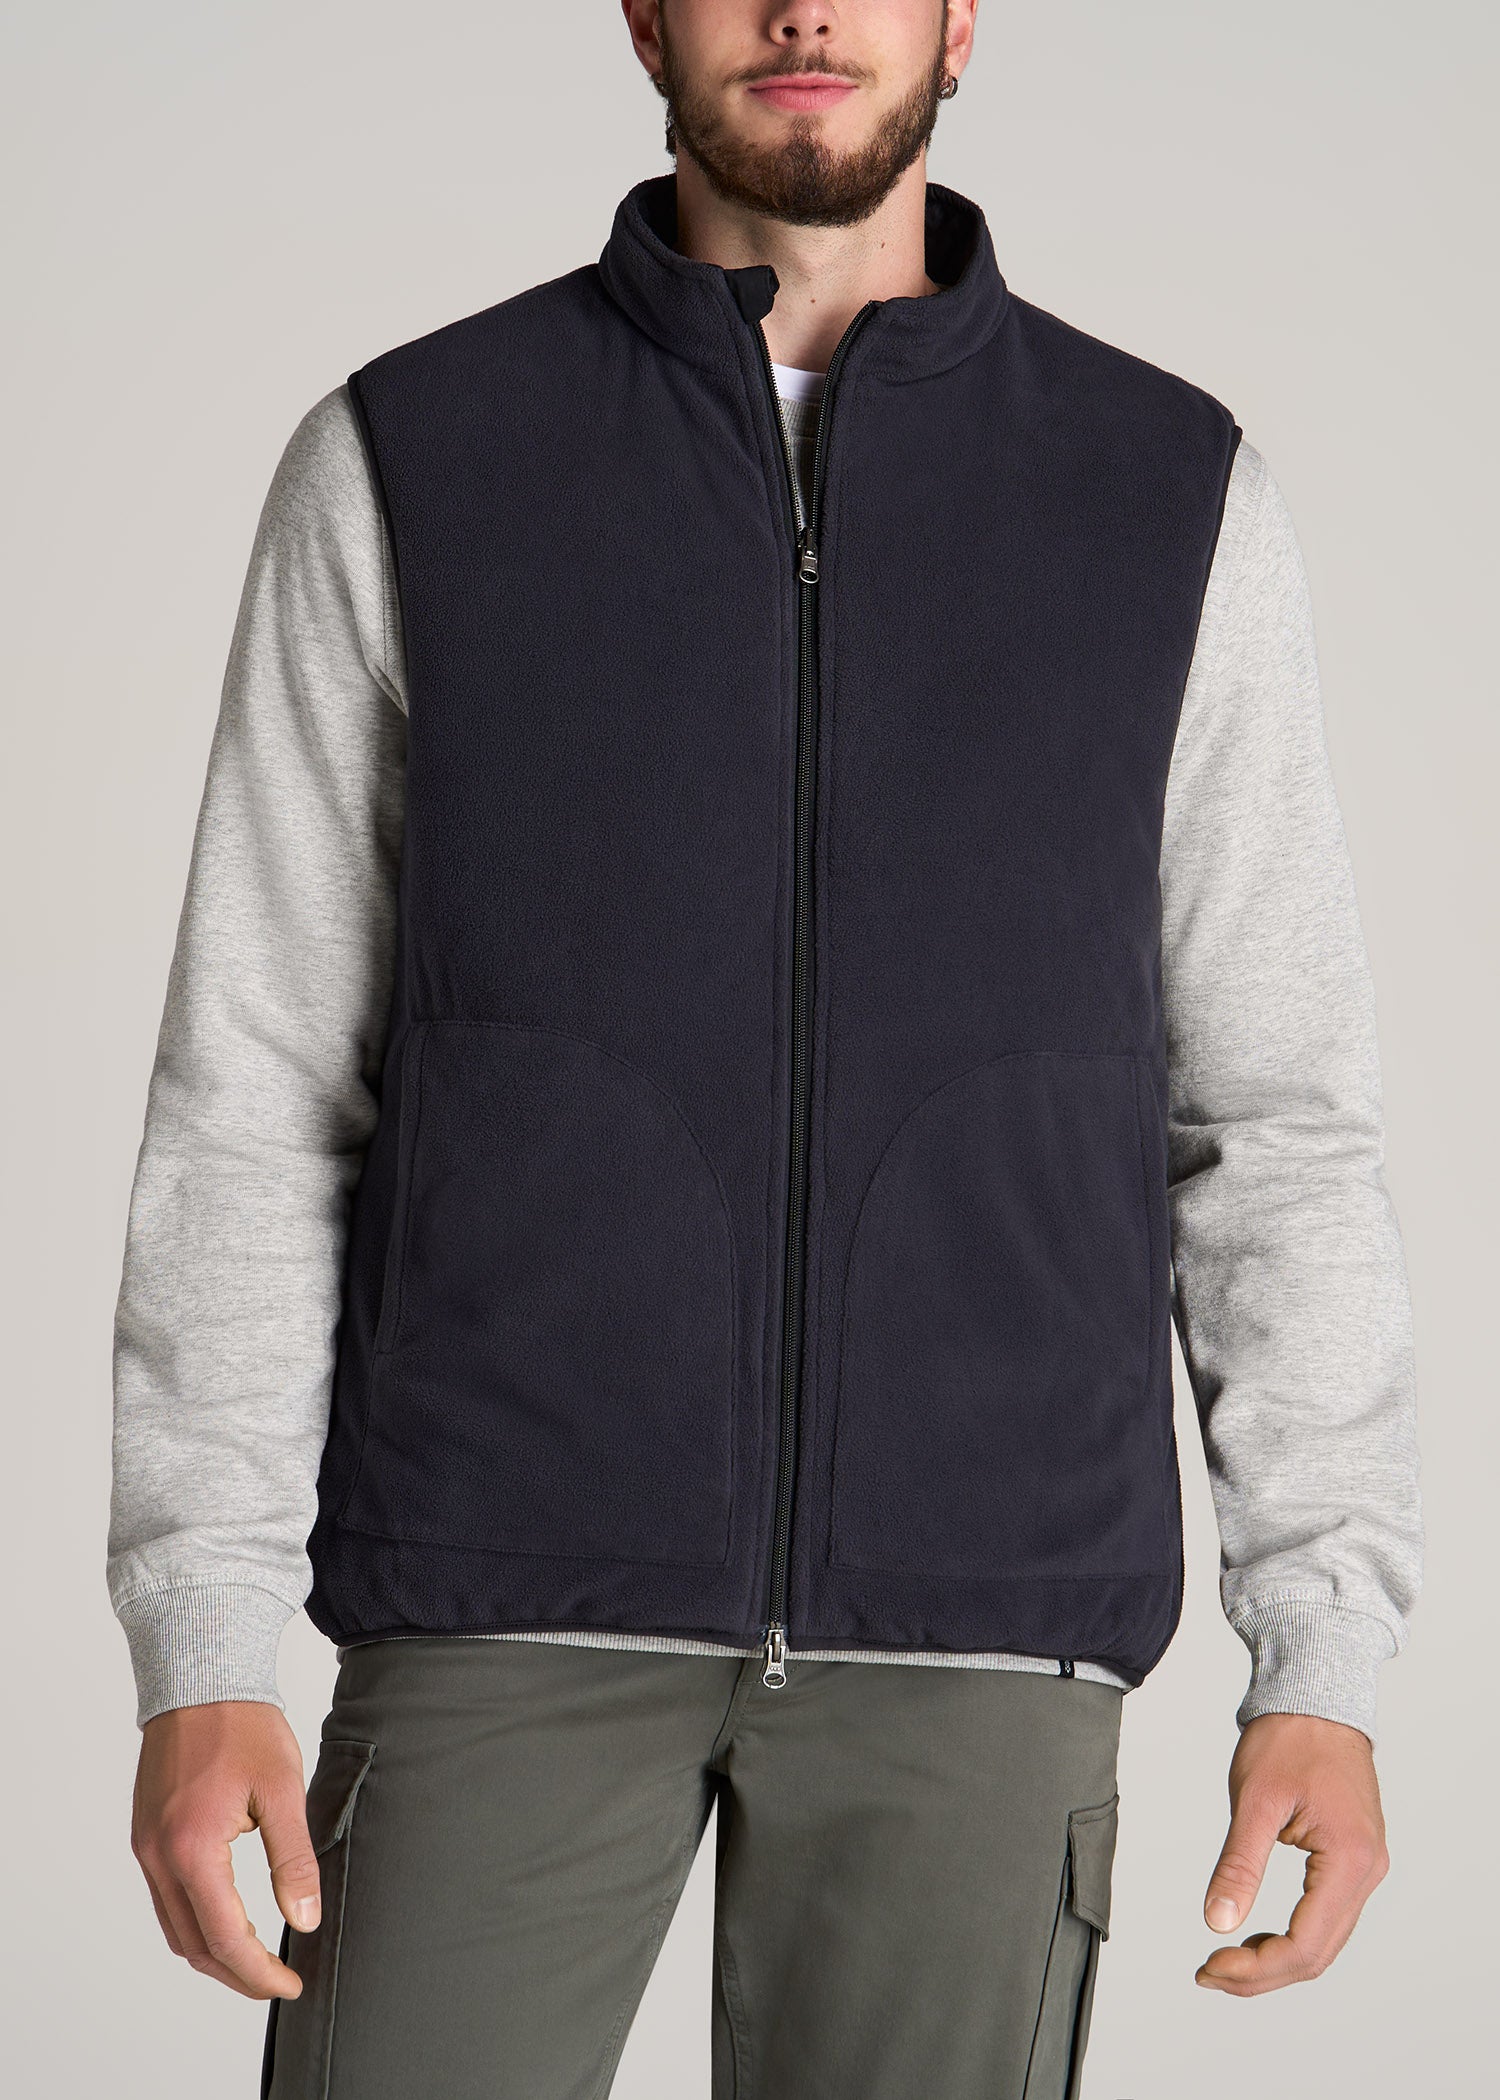 Double Sided Quilted Fabric With Polyester Filling Gray vest, Jacket 